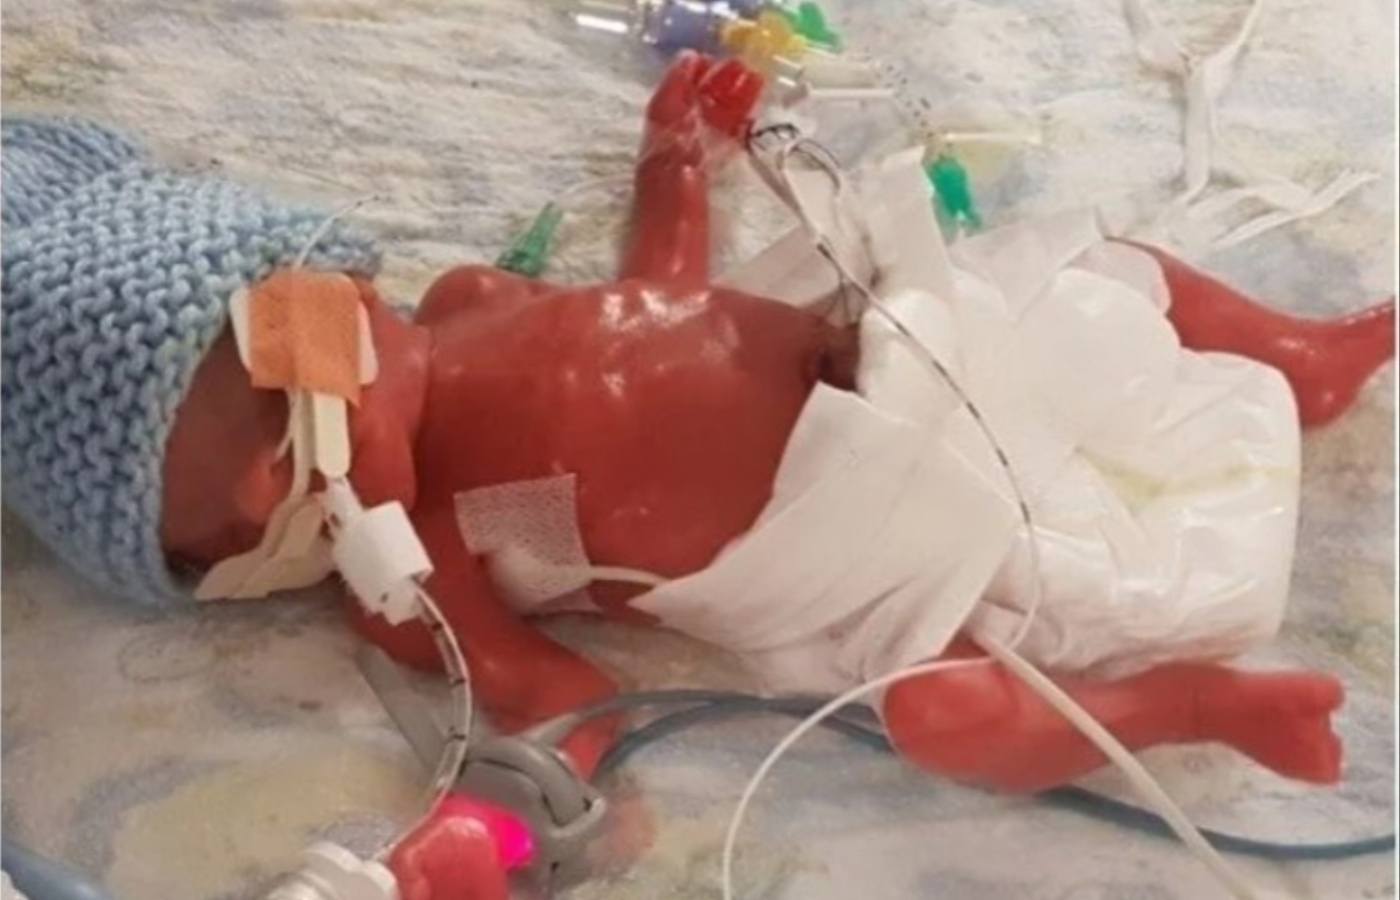 Innes was born at the neonatal unit in Wishaw in 2019.